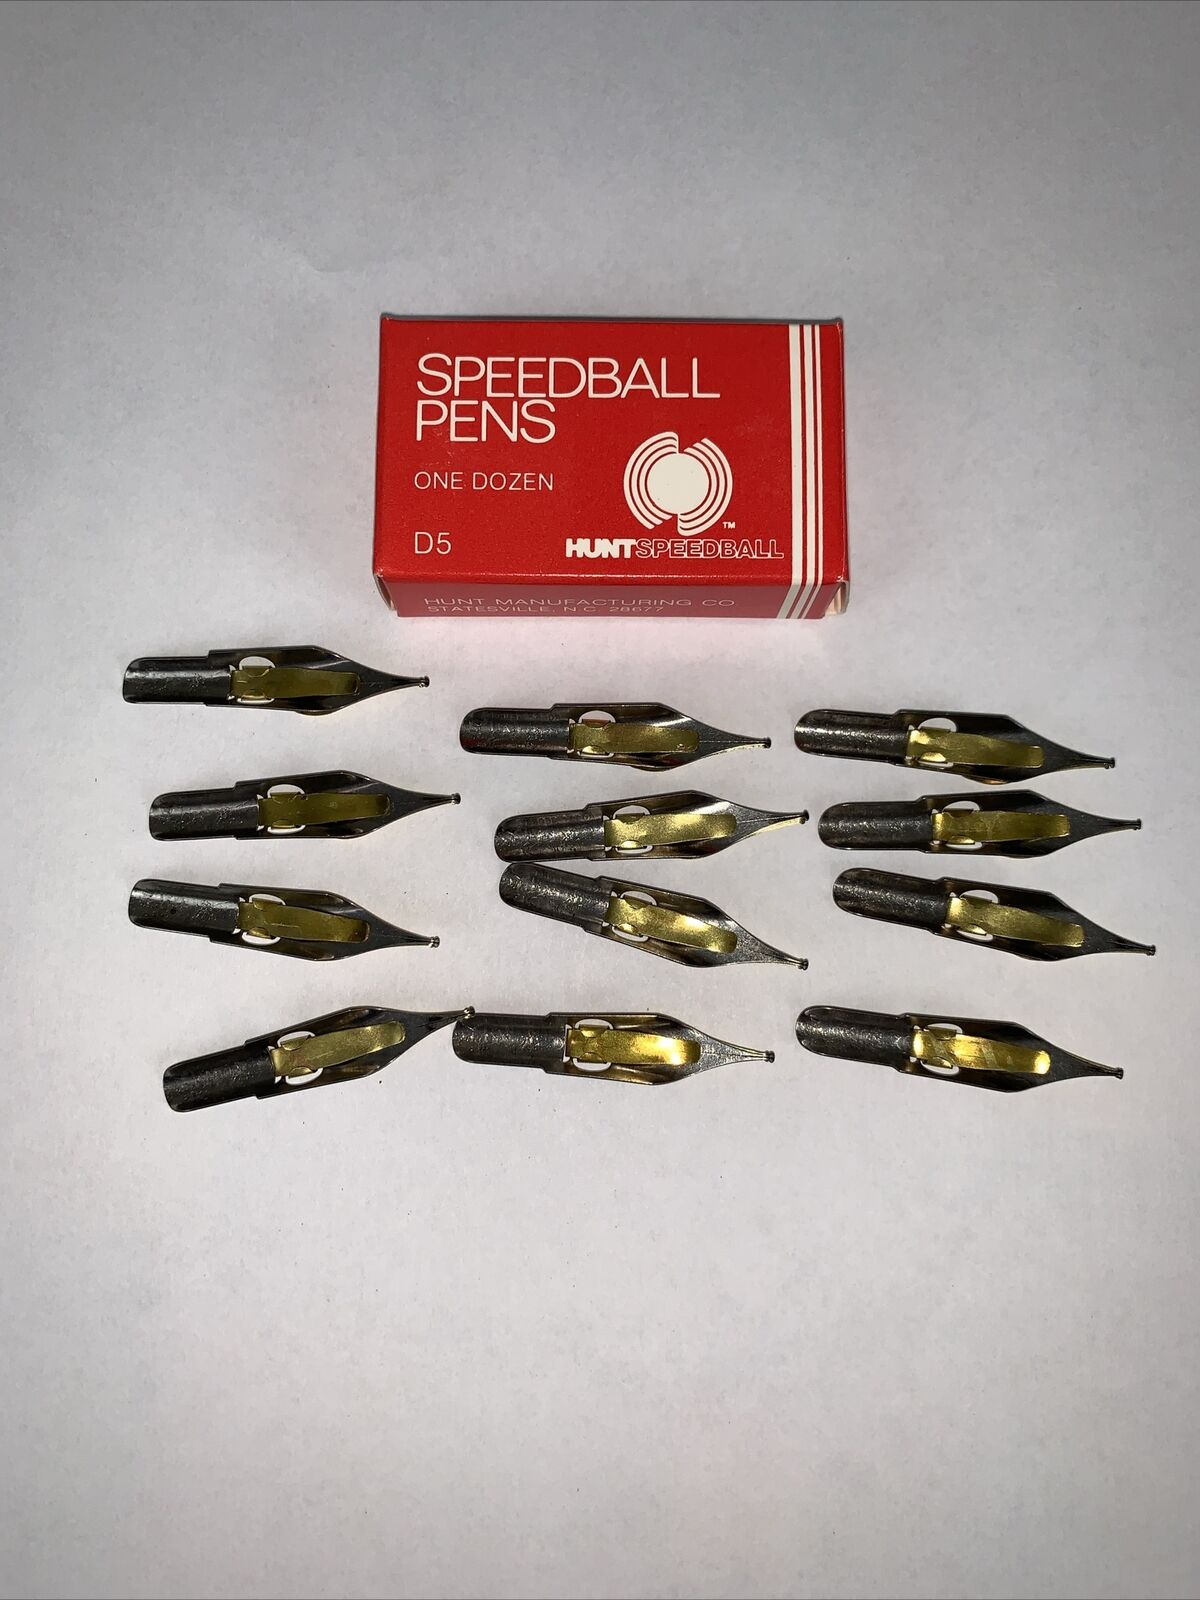 Vintage HUNT SPEEDBALL PENS D-5 Oval Easy To Use Calligraphy Pen Nibs (12)